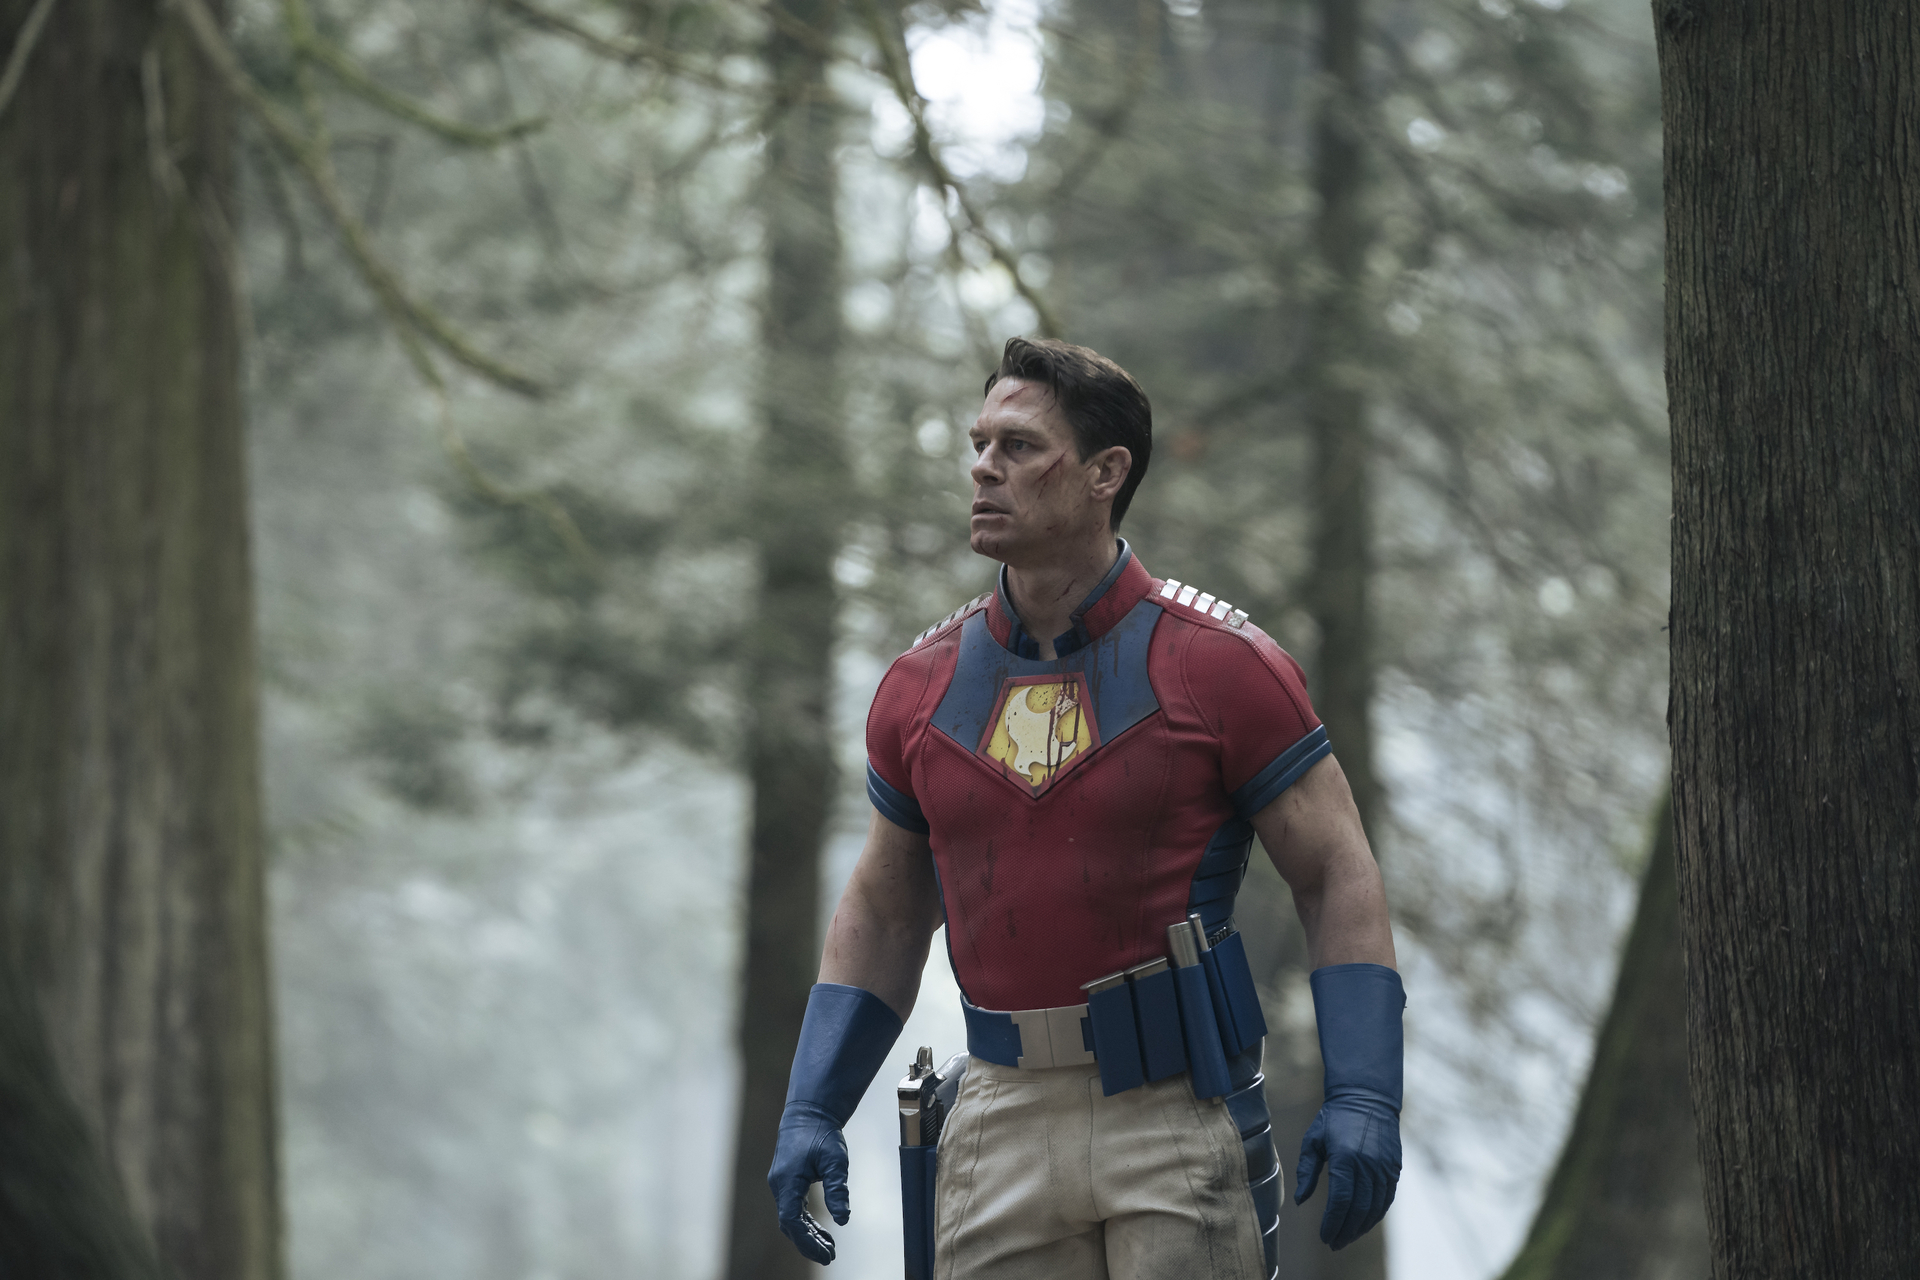 John Cena as Christopher Smith in DC's 'Peacemaker' Episode 8. He's standing in the woods and looks surprised.